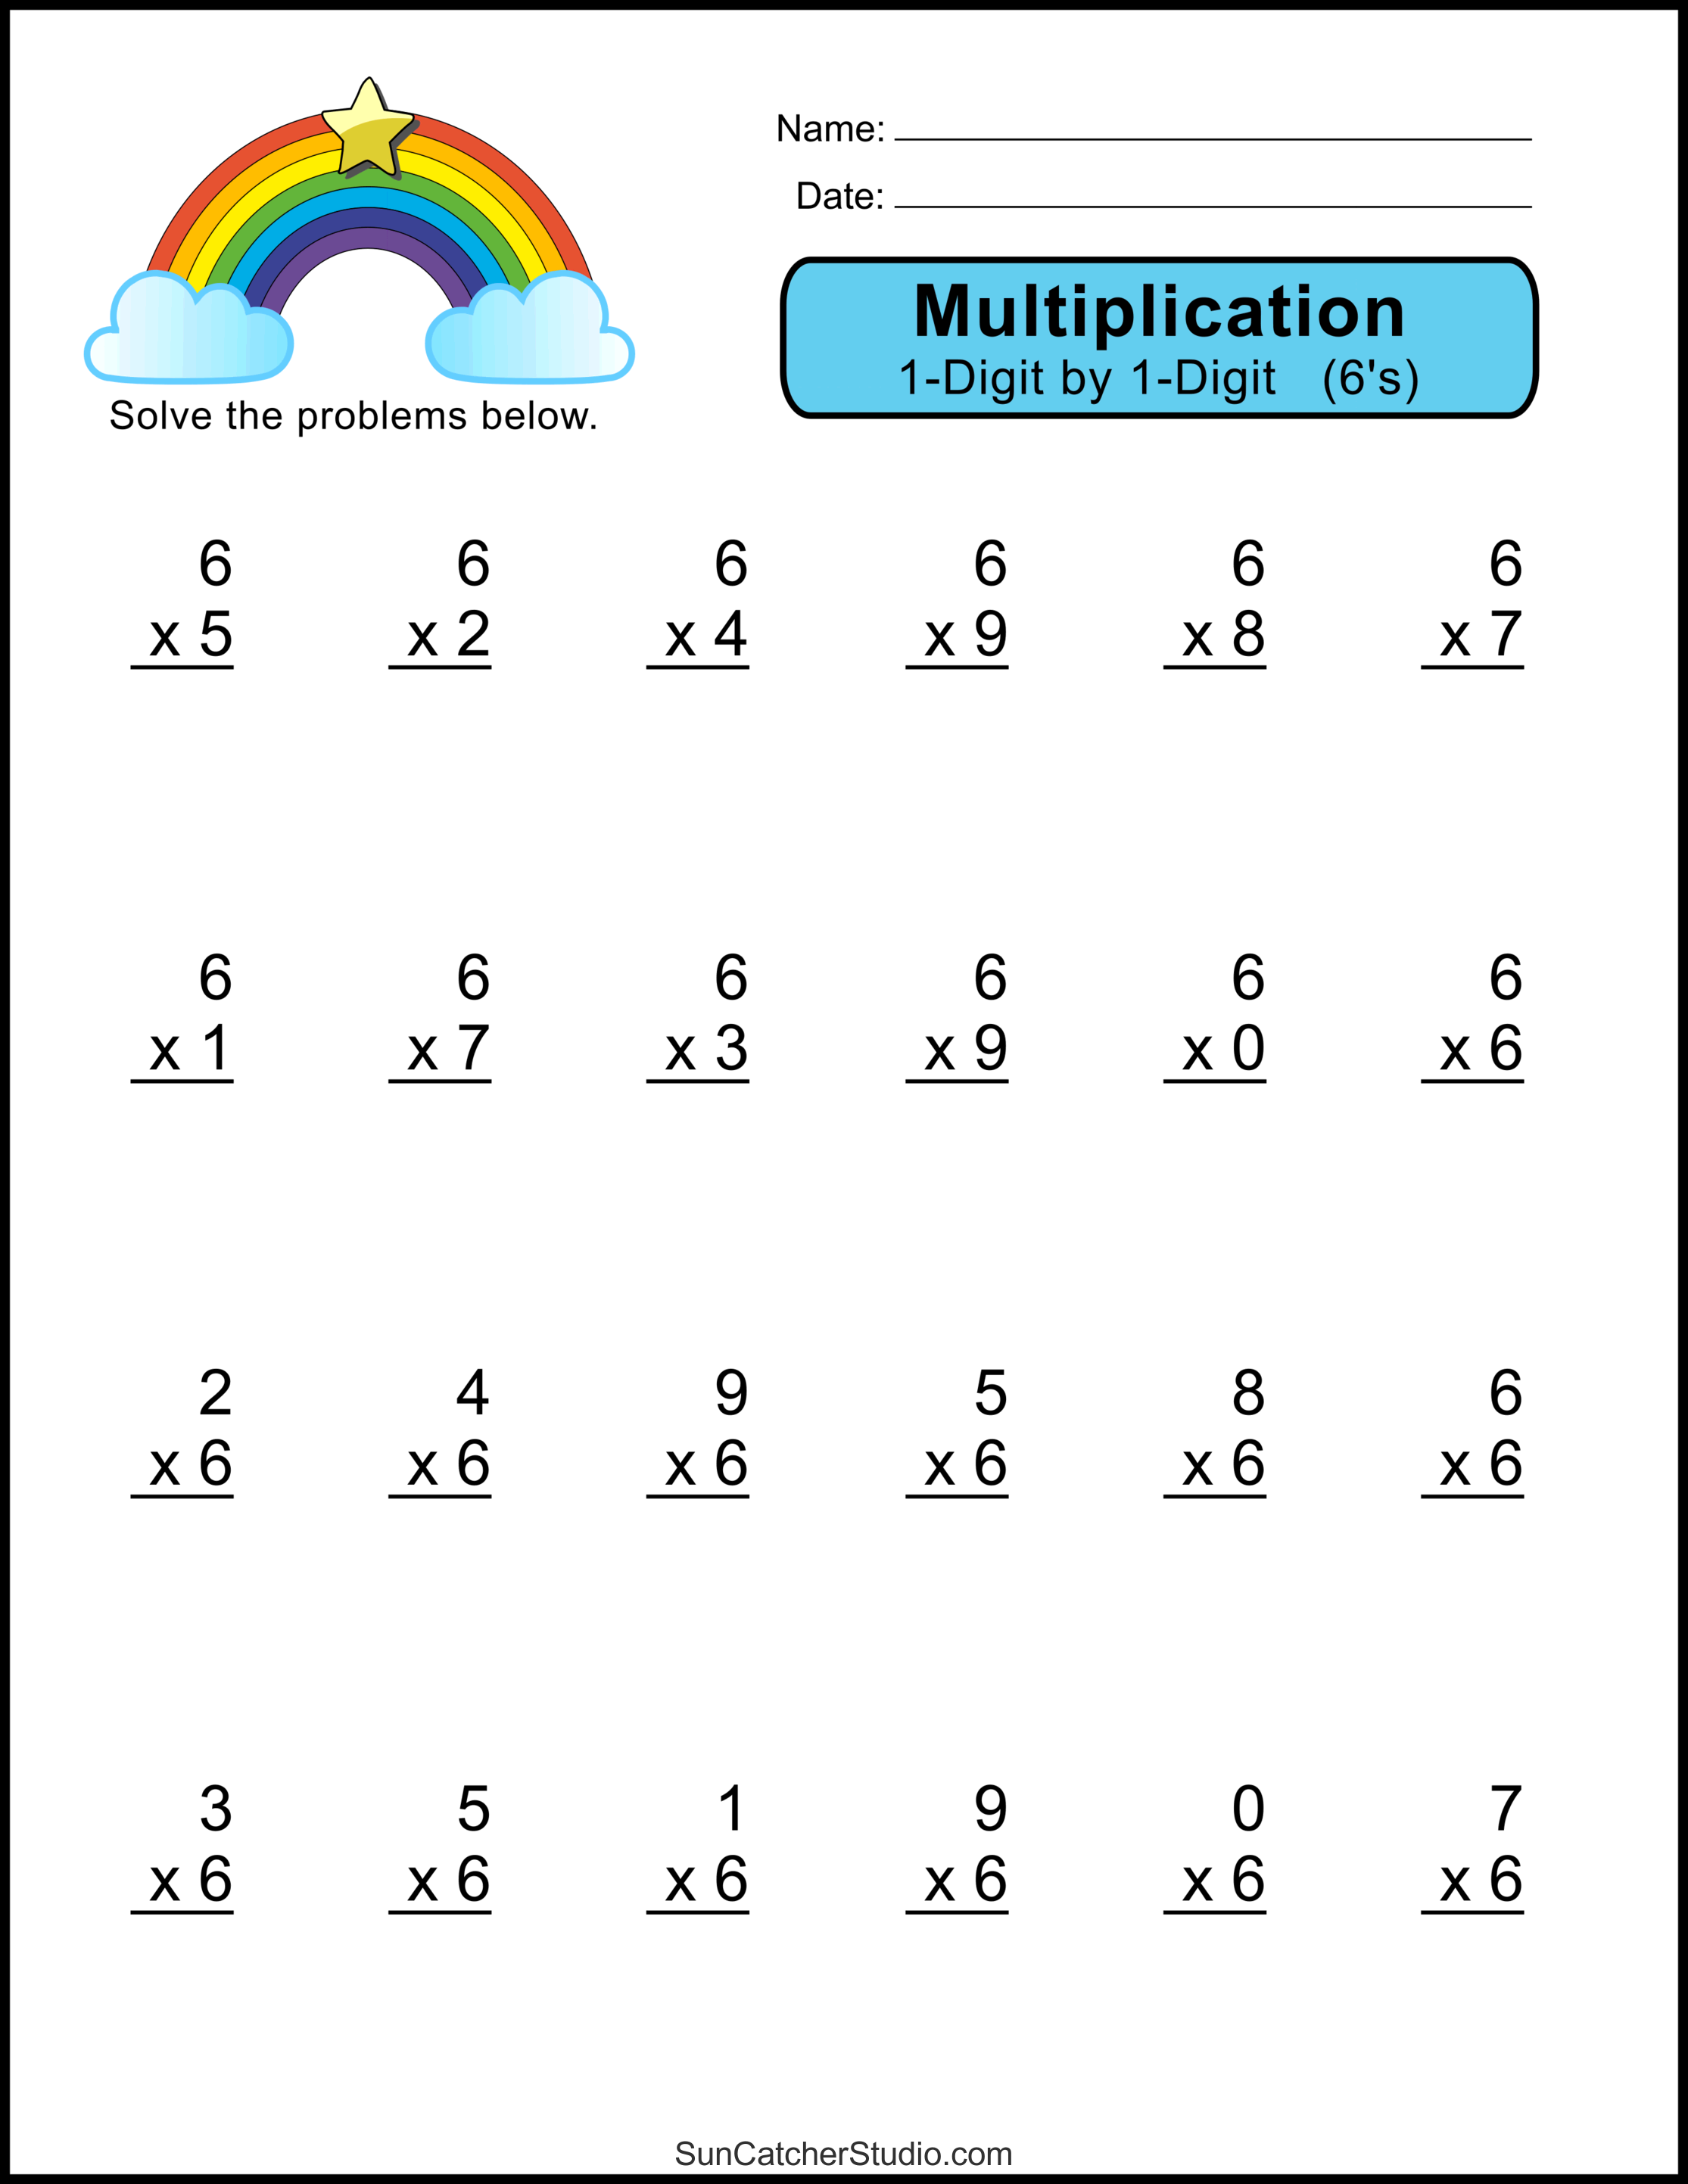 multiplication-worksheets-one-digit-math-drills-diy-projects